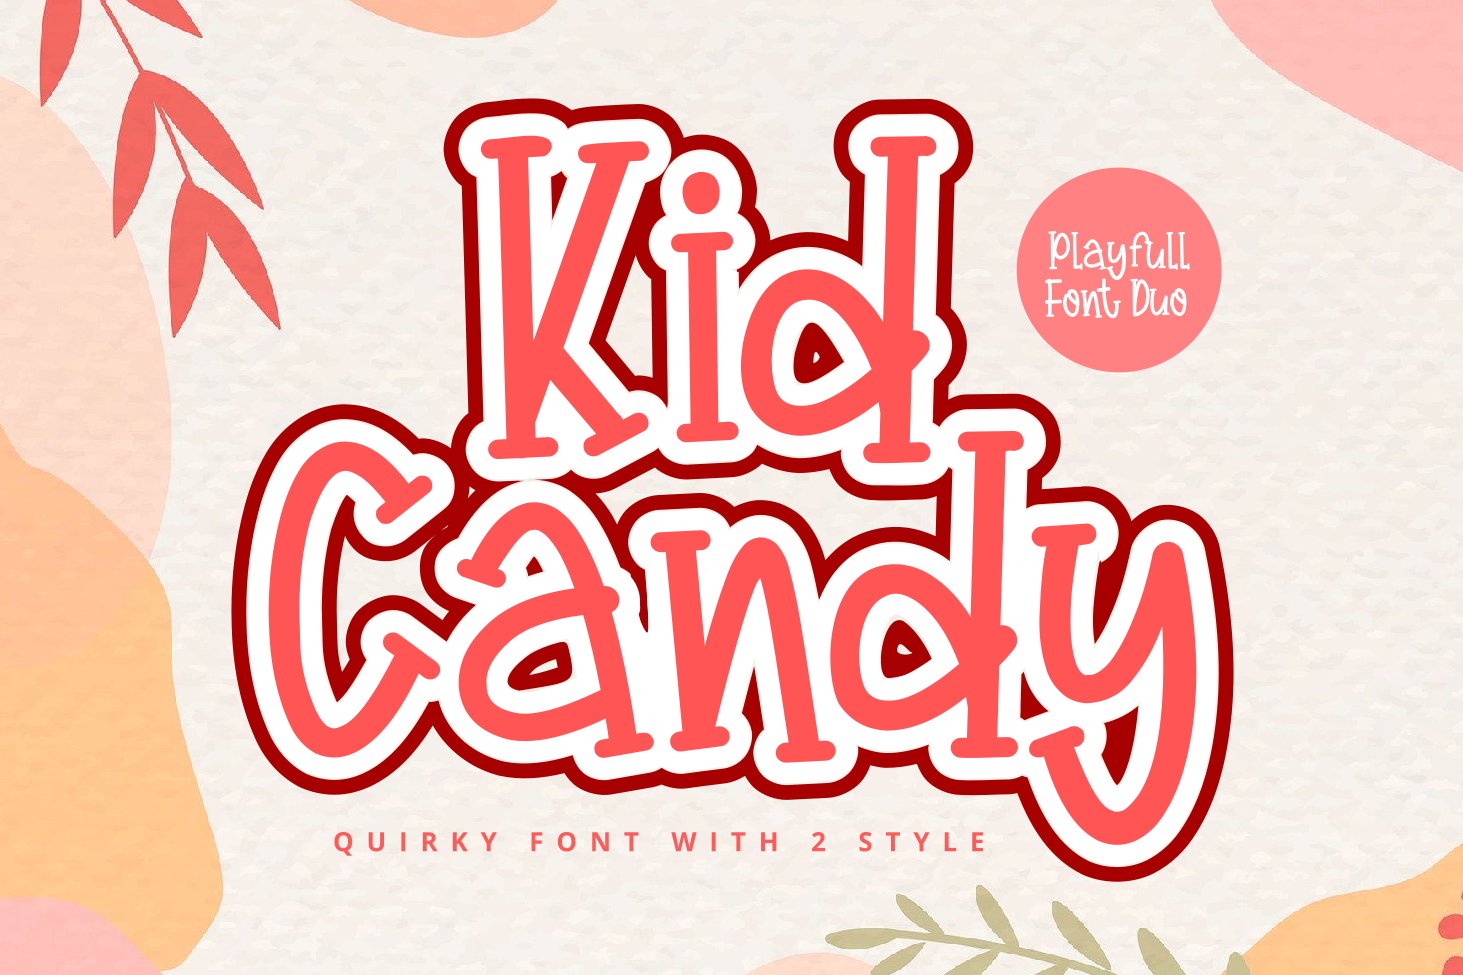 Kid Candy - Palyful Font Duo cover image.